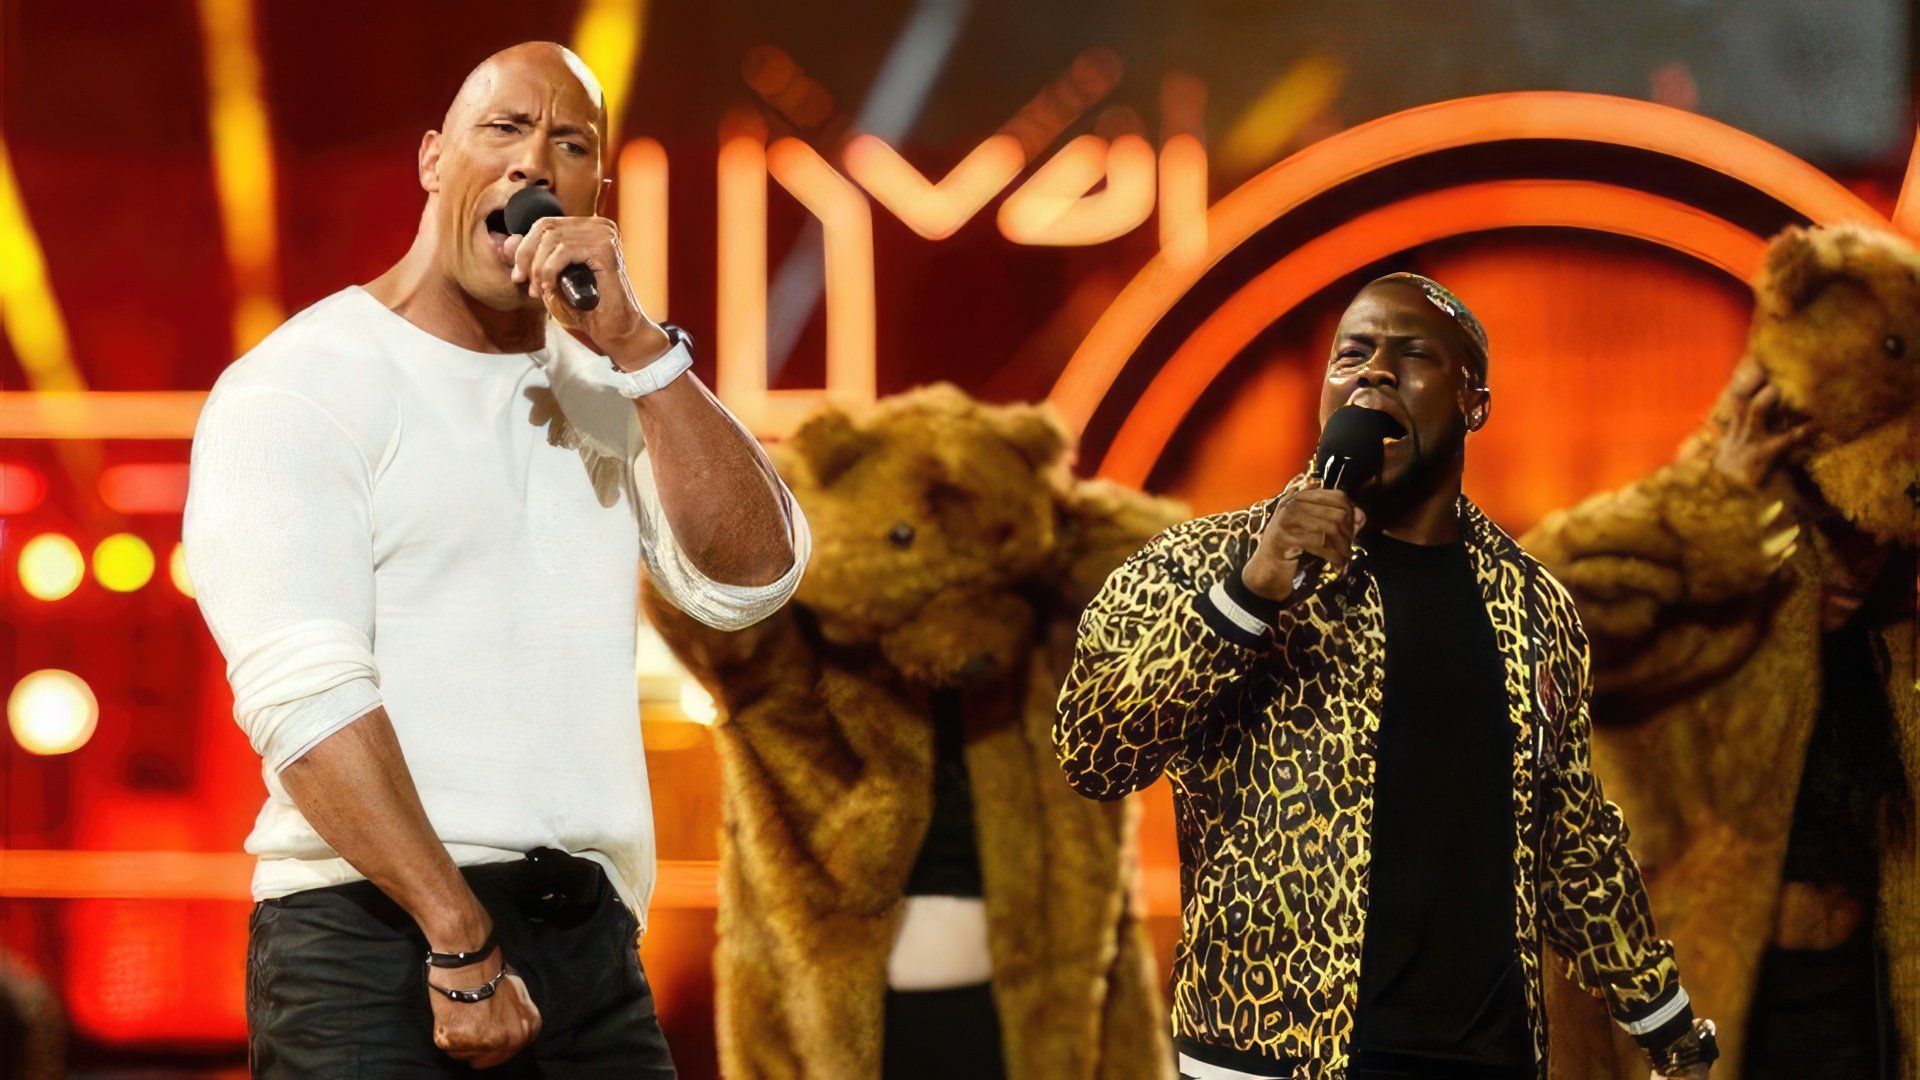 Kevin Hart and Dwayne Johnson are friends in real life